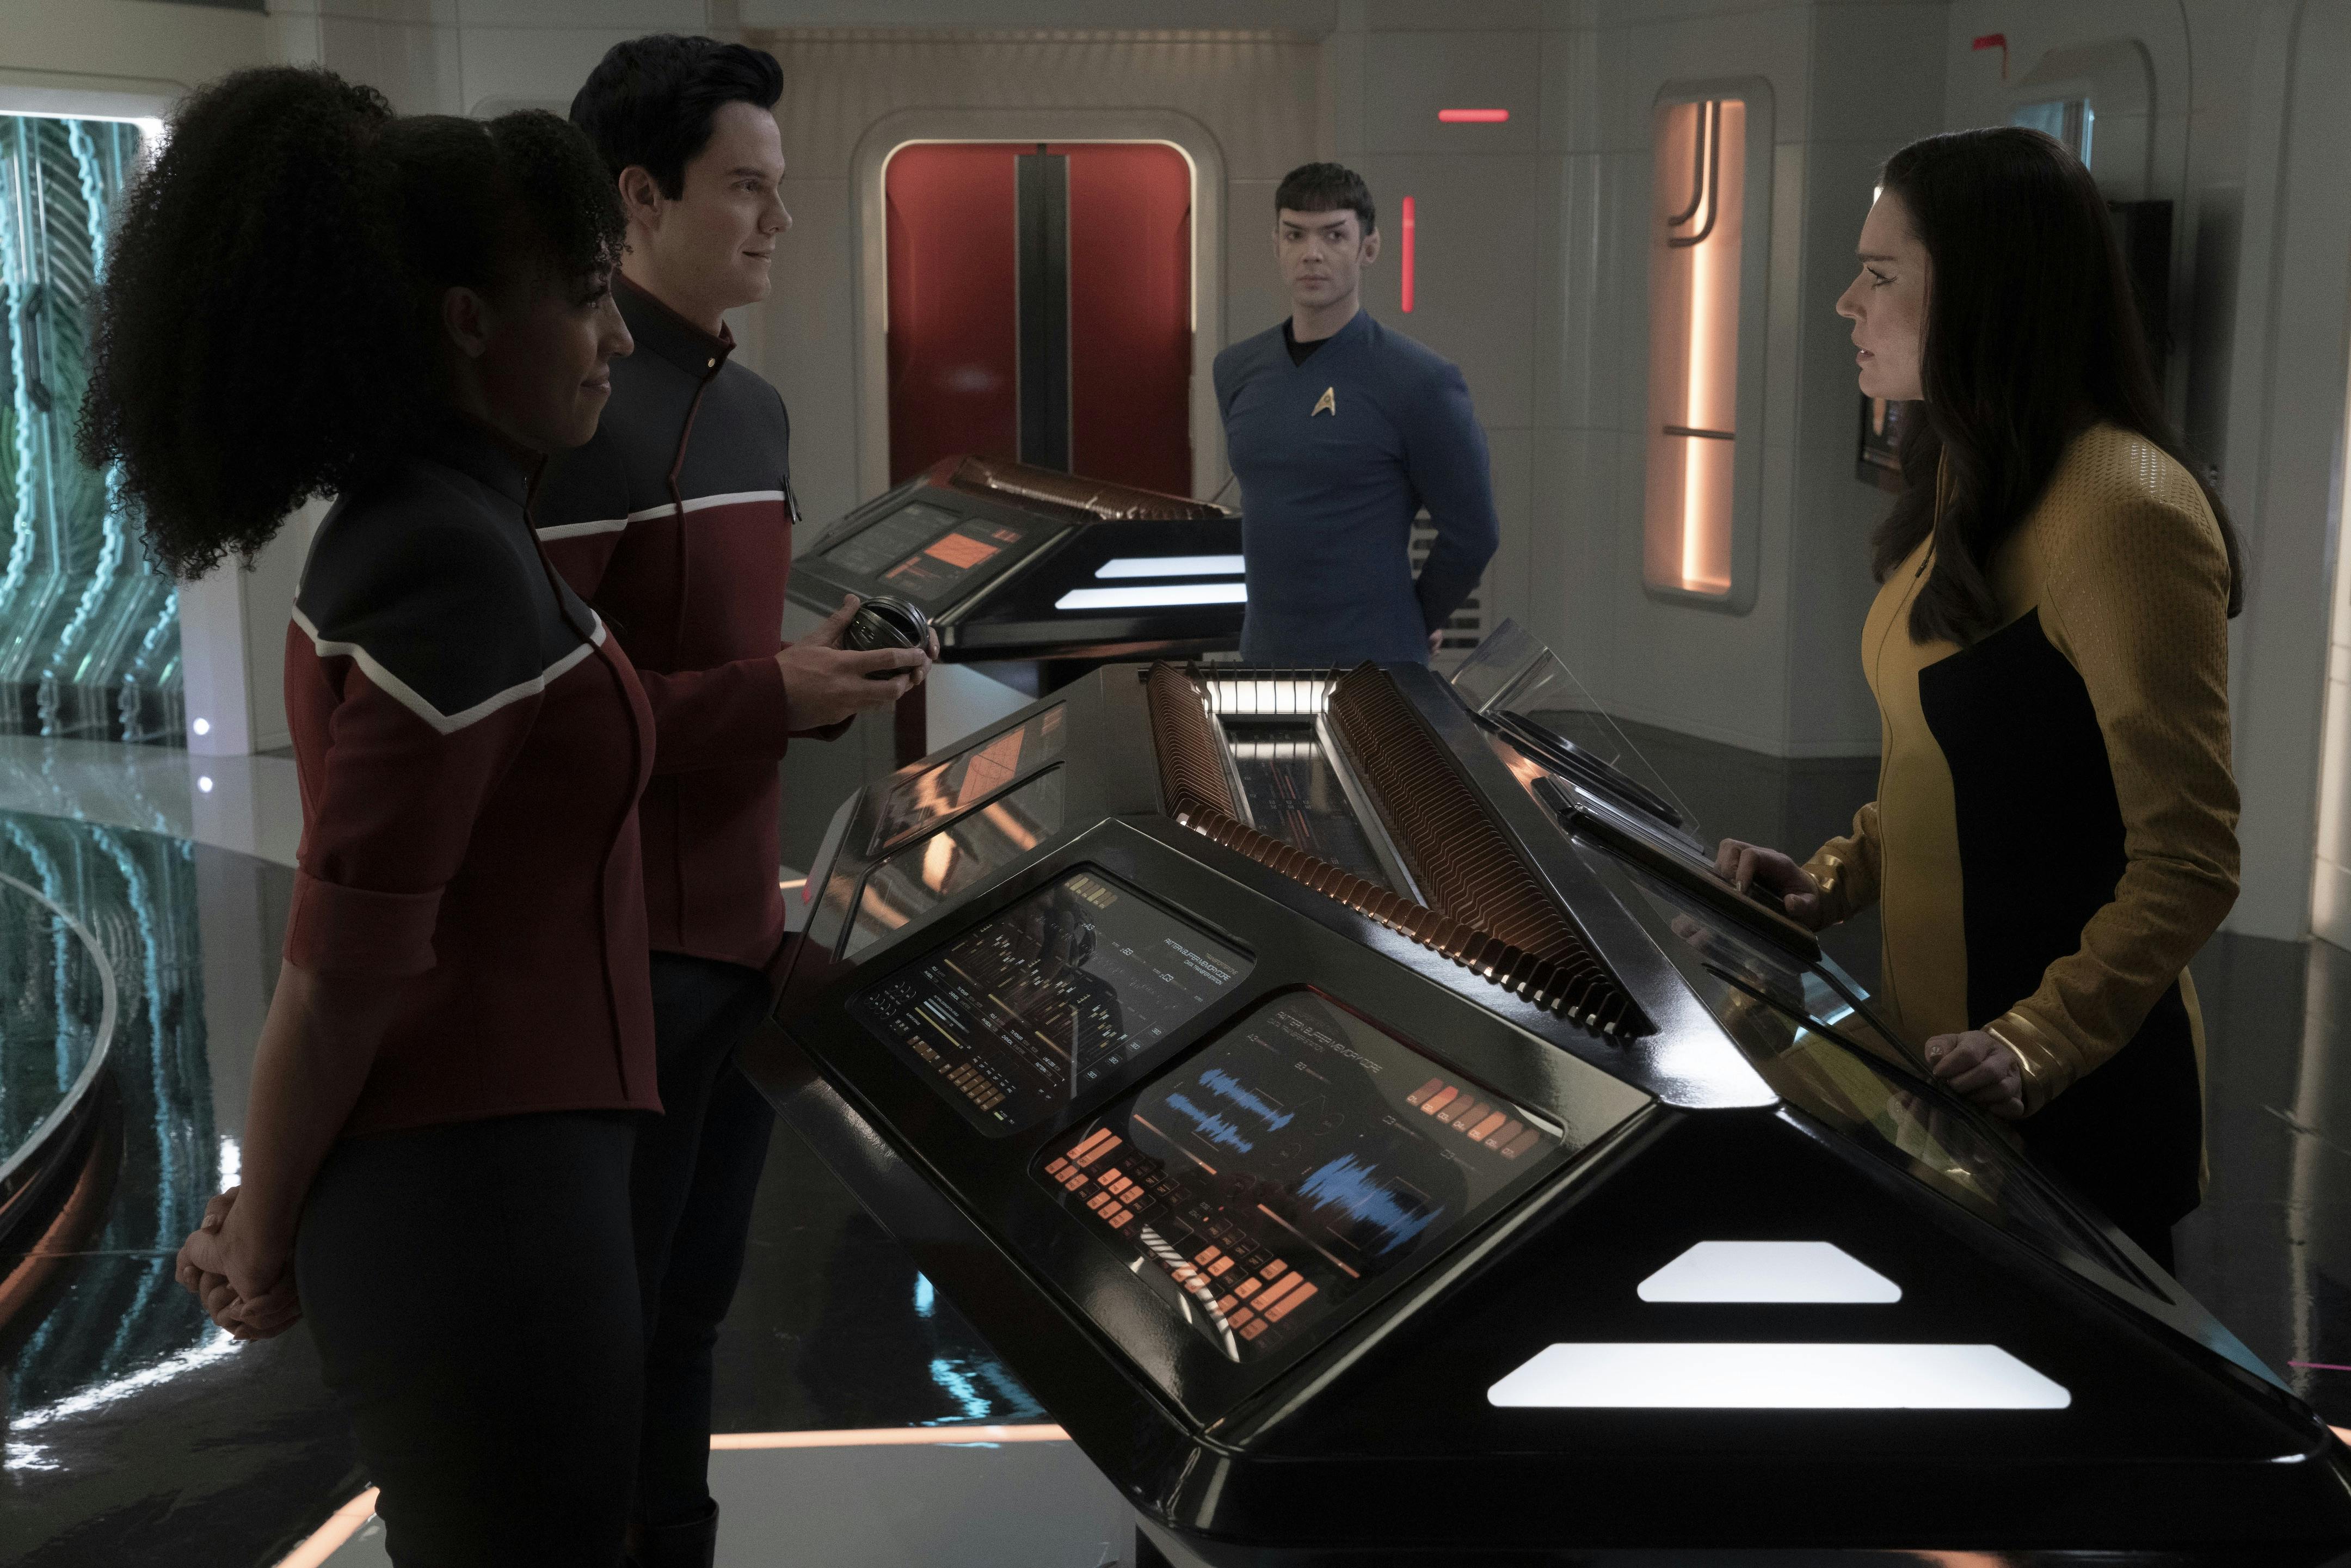 In the Transporter Room, Mariner and Boimler explain to Una that she is the poster girl for Starfleet in the future as Spock observes them in 'Those Old Scientists'